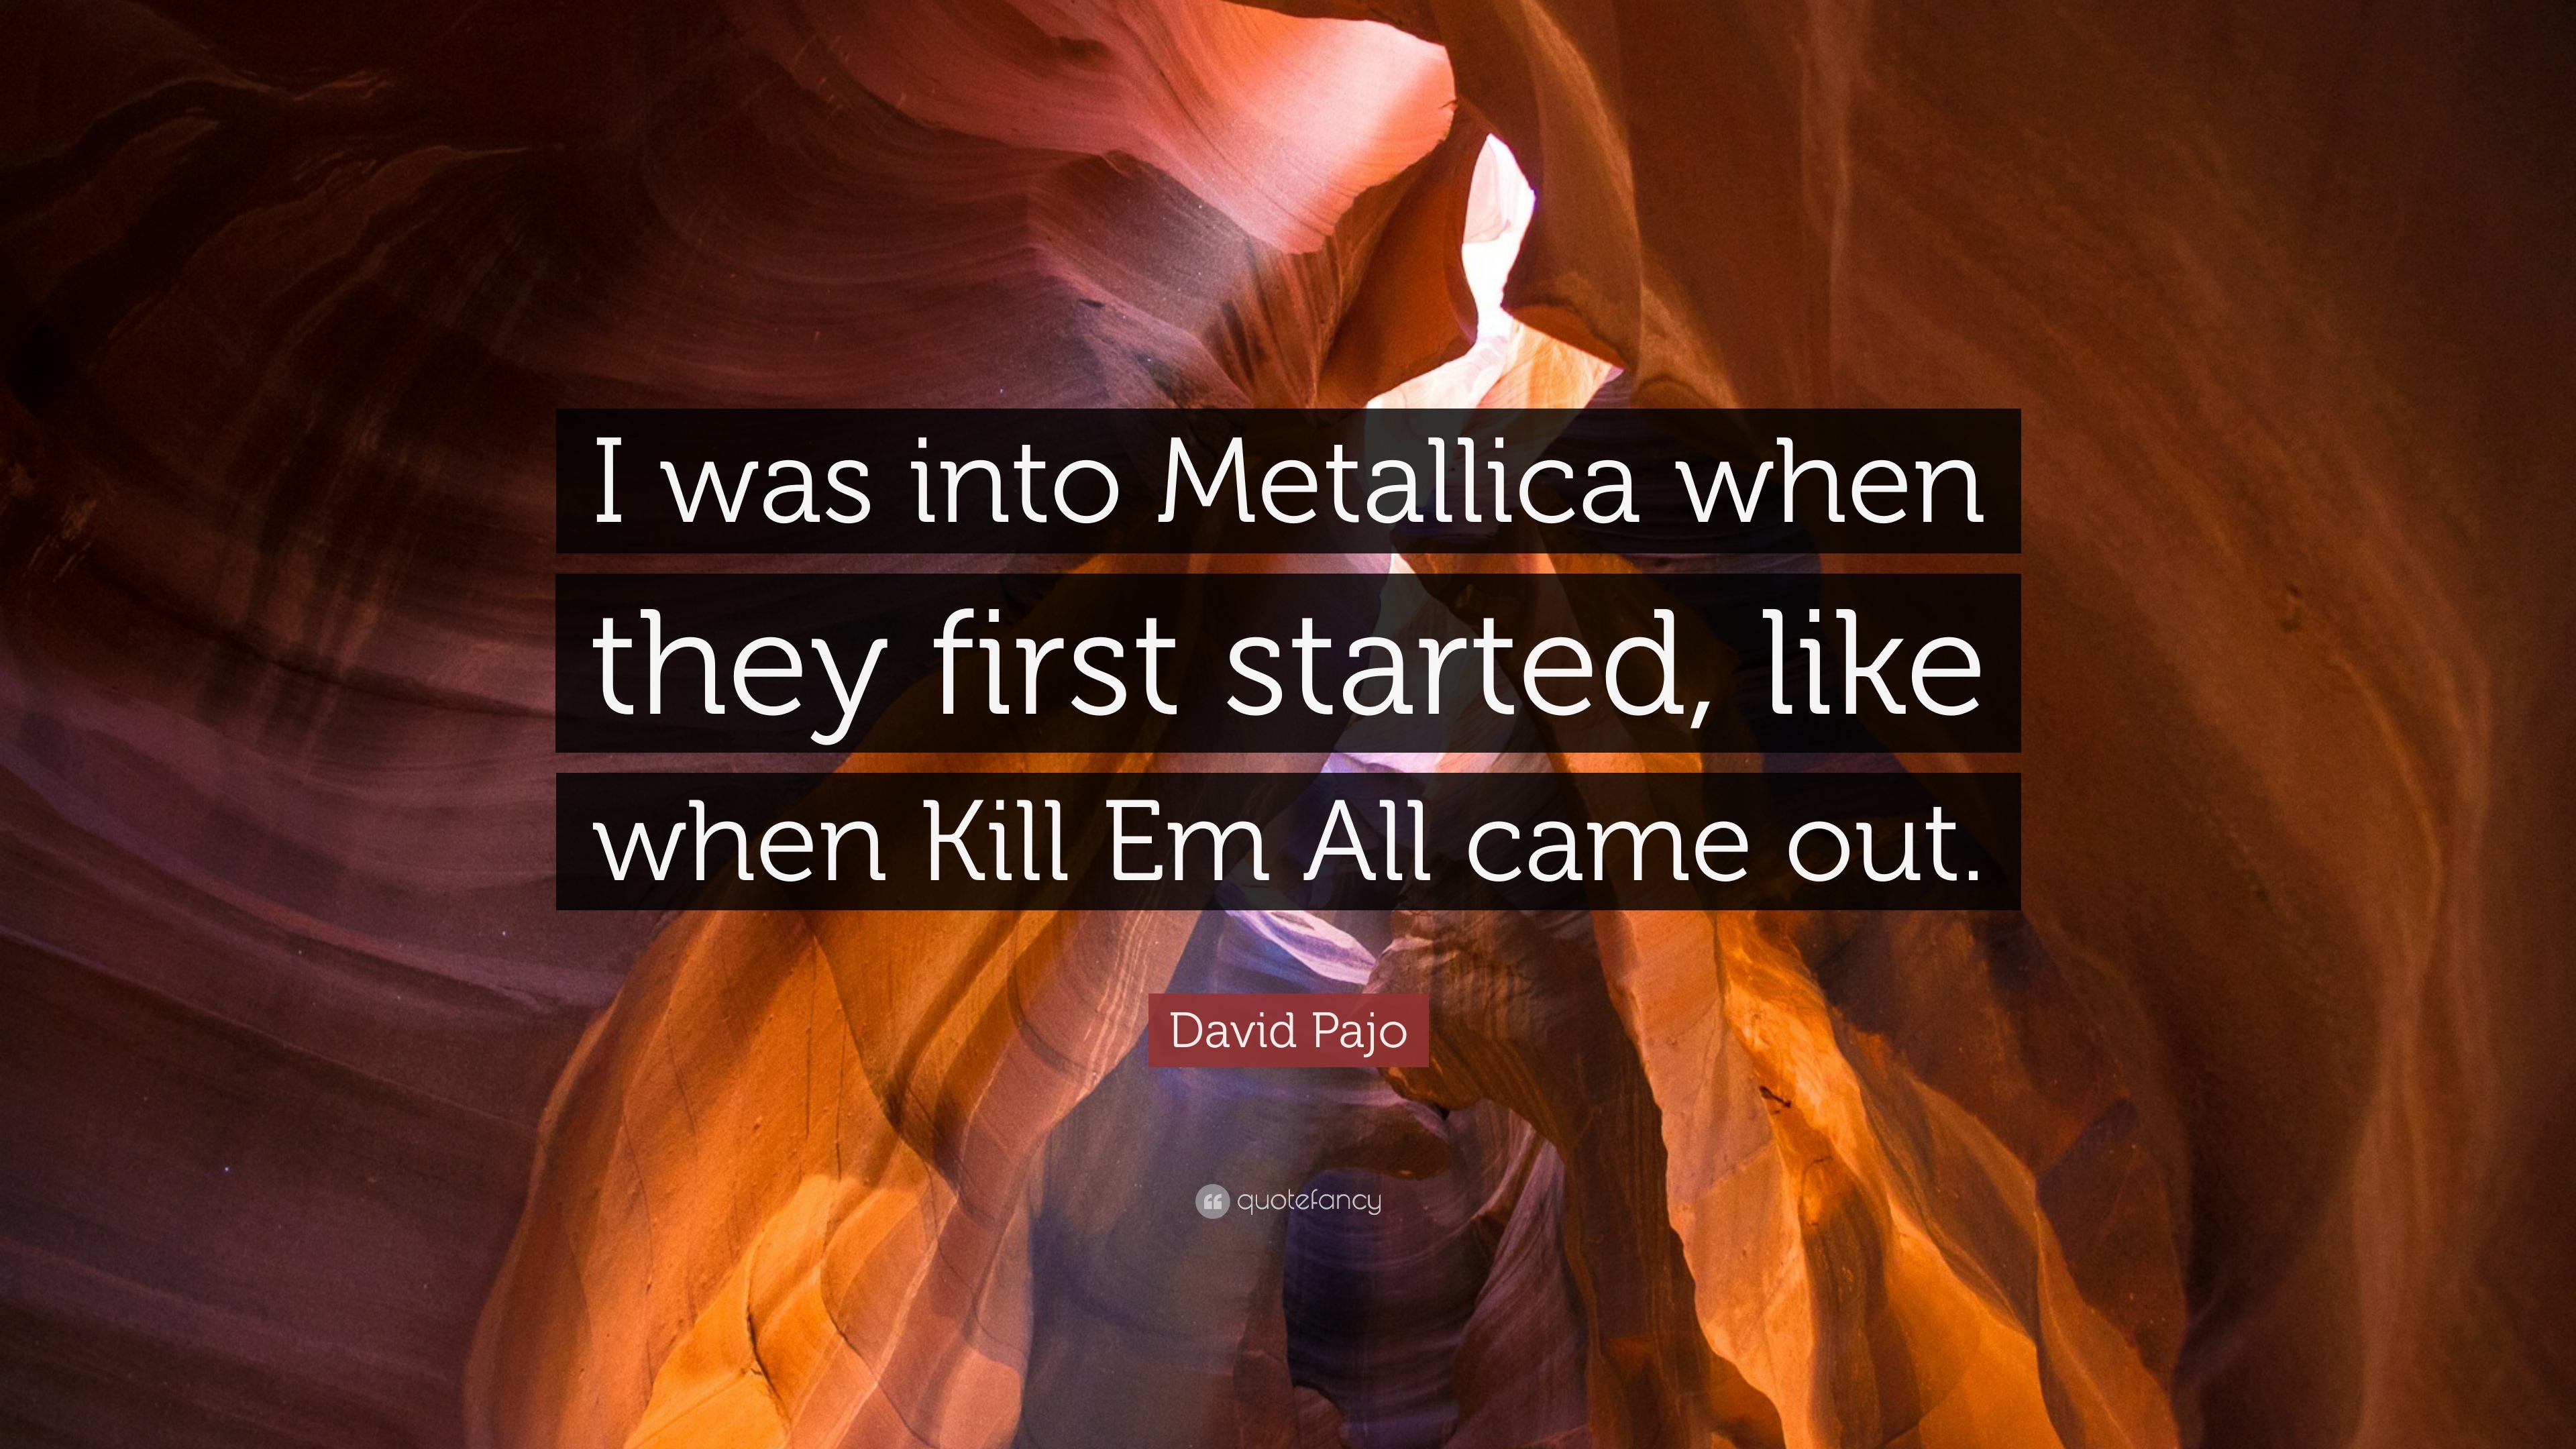 David Pajo Quote: “I was into Metallica when they first started